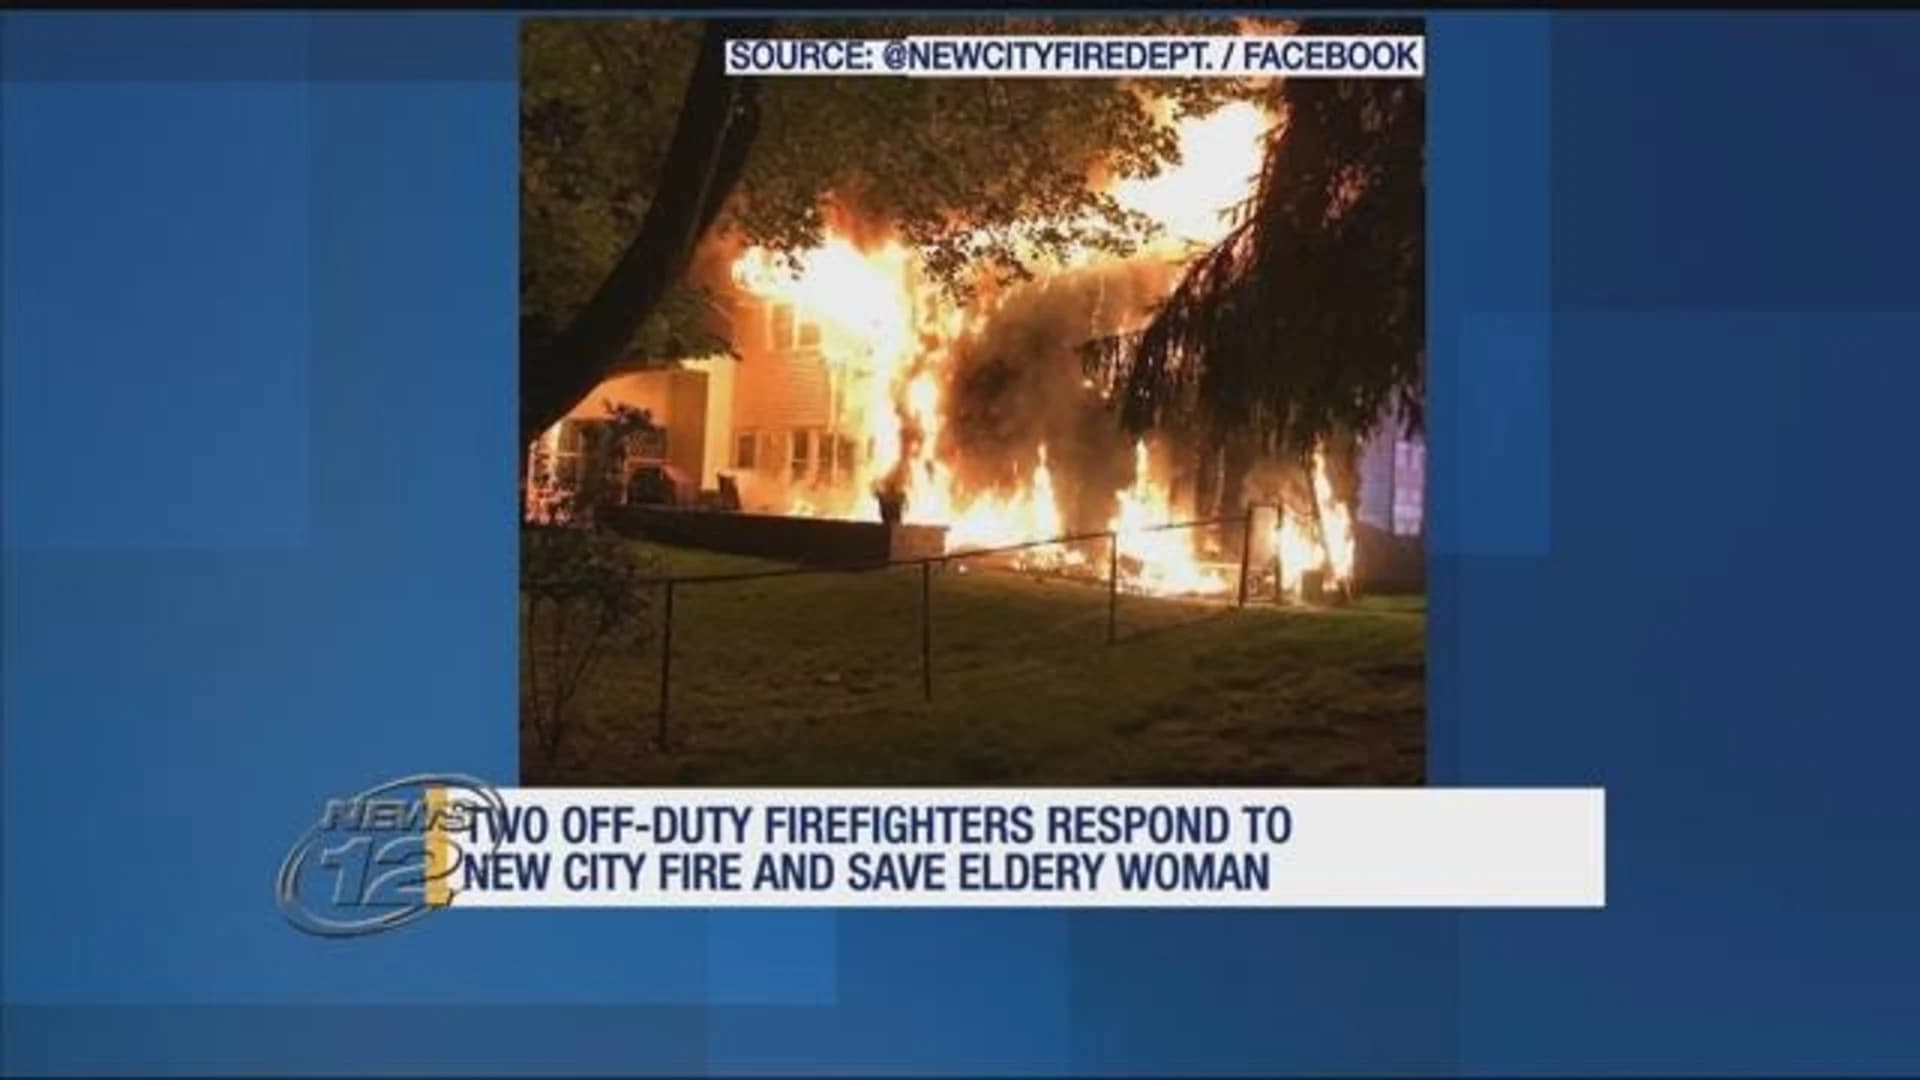 Firefighters going above and beyond in New City